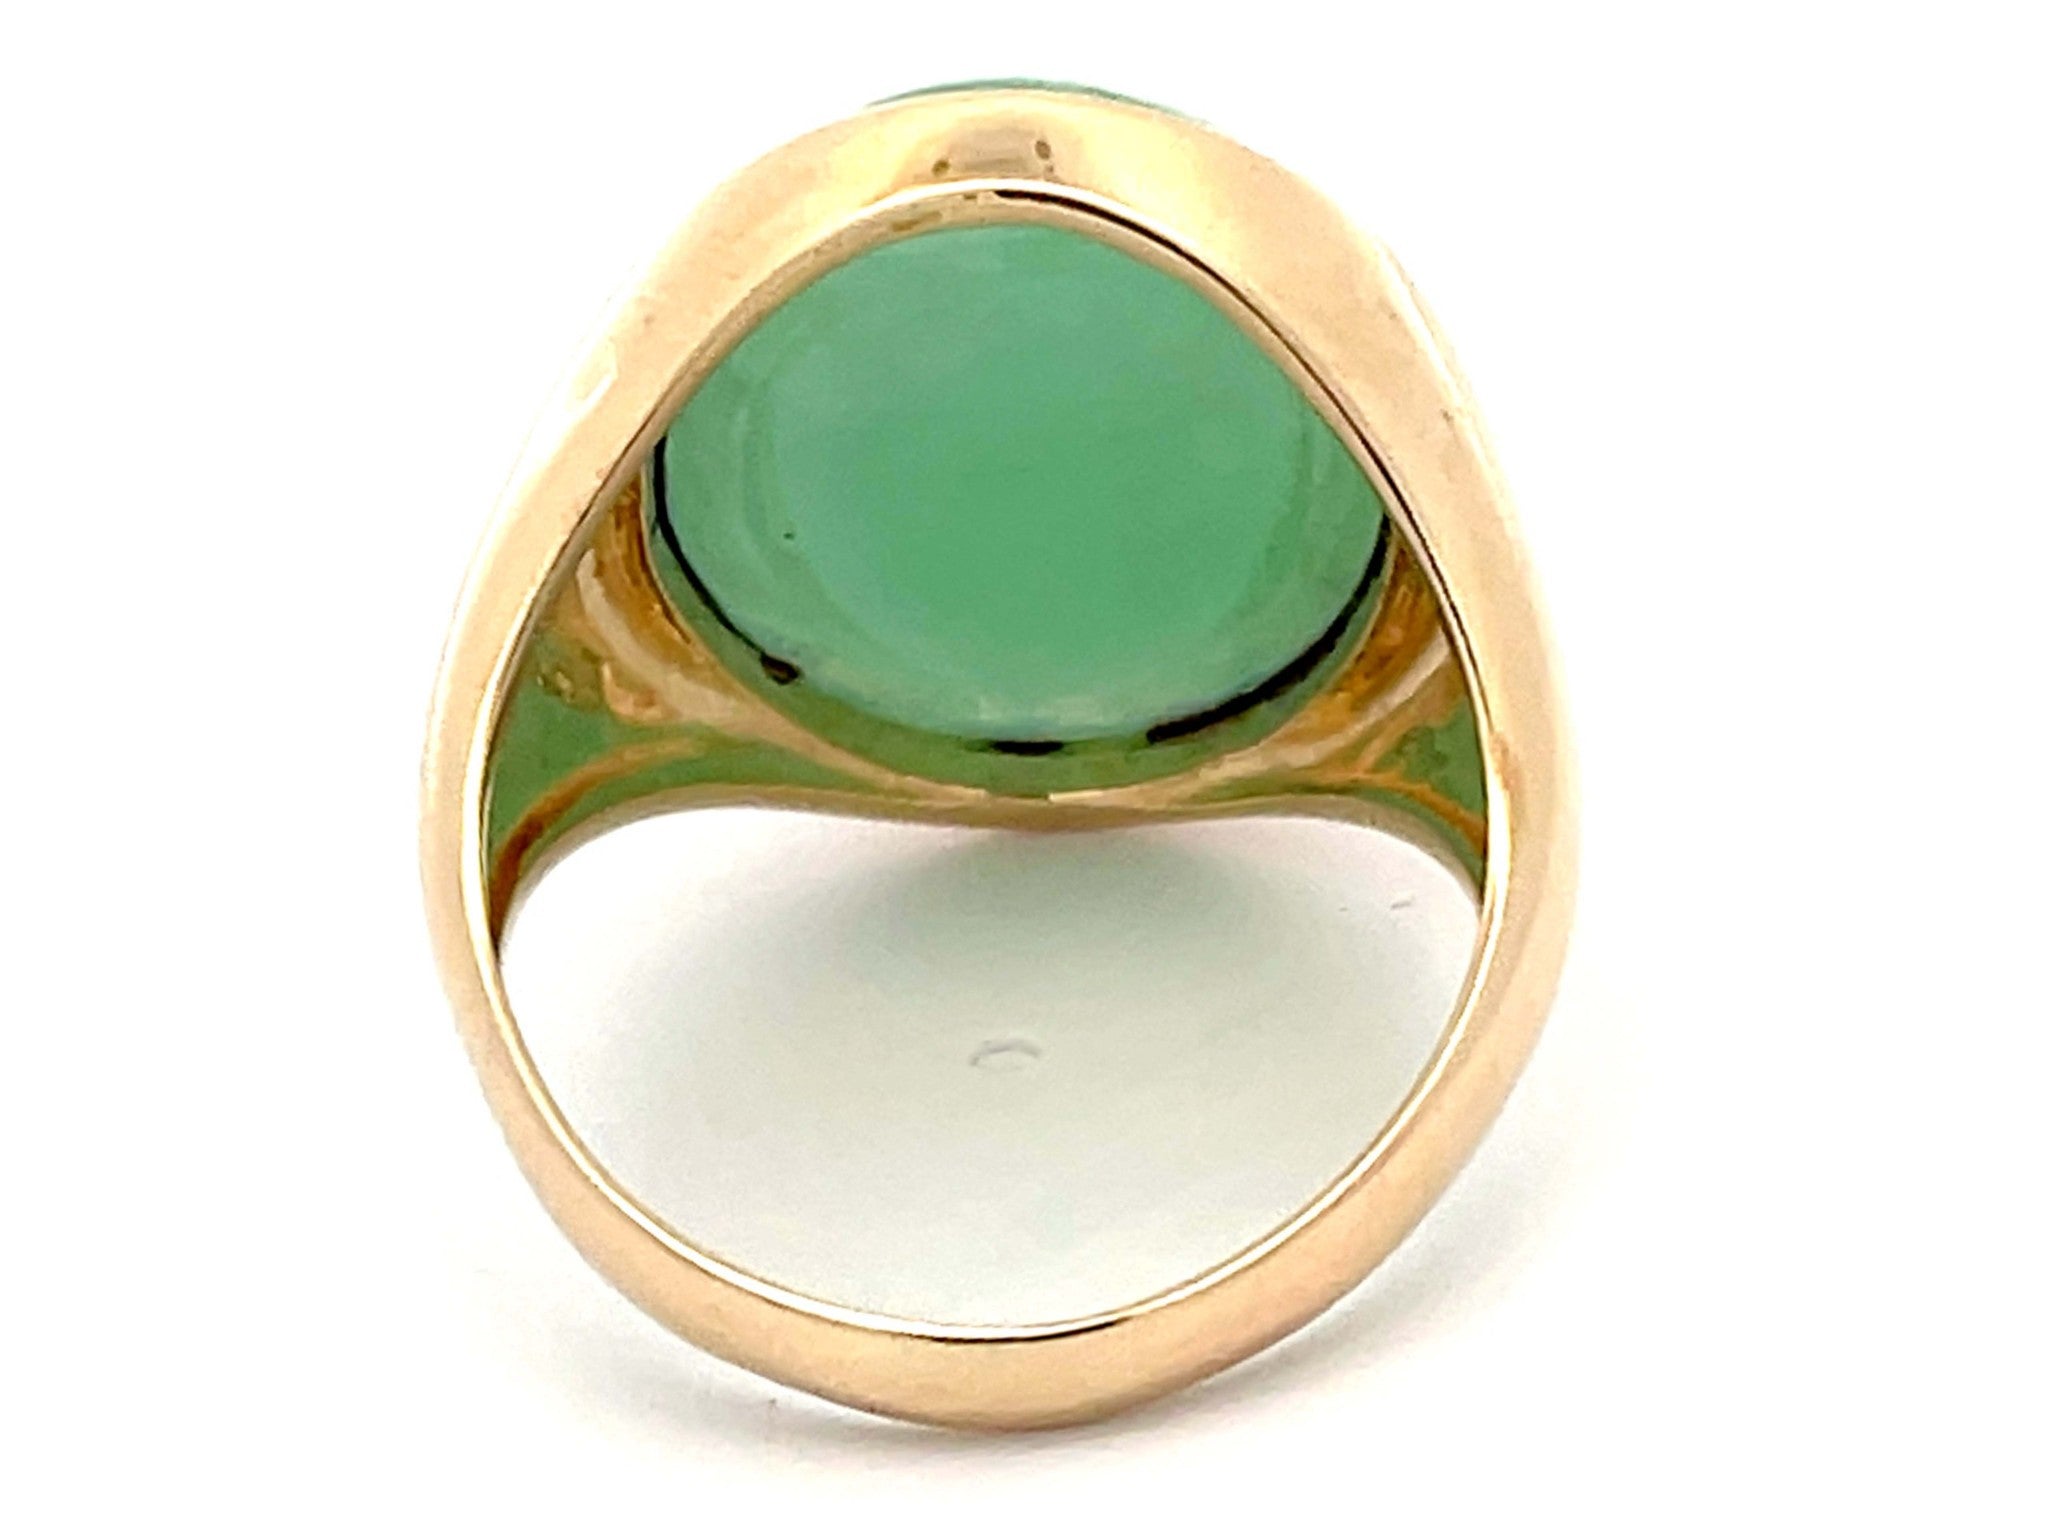 22 Carat Oval Cabochon Green Jade Ring in 14K Yellow Gold